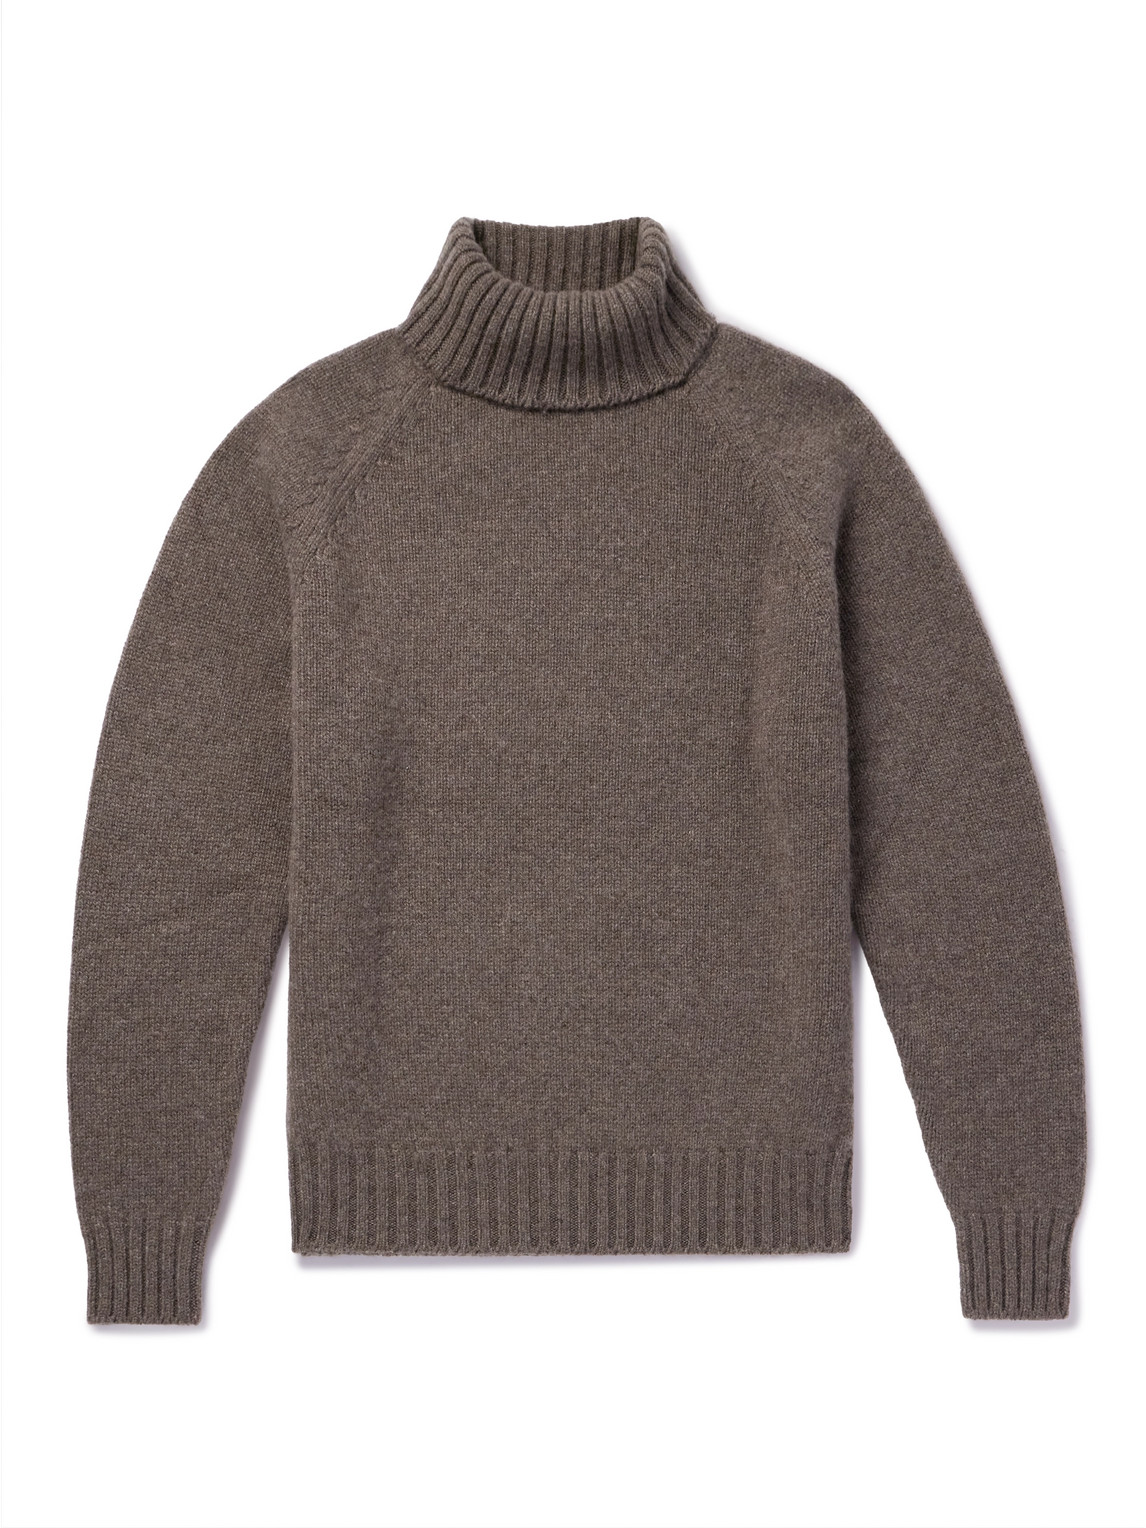 Umit Benan B+ Cashmere Rollneck Sweater In Brown